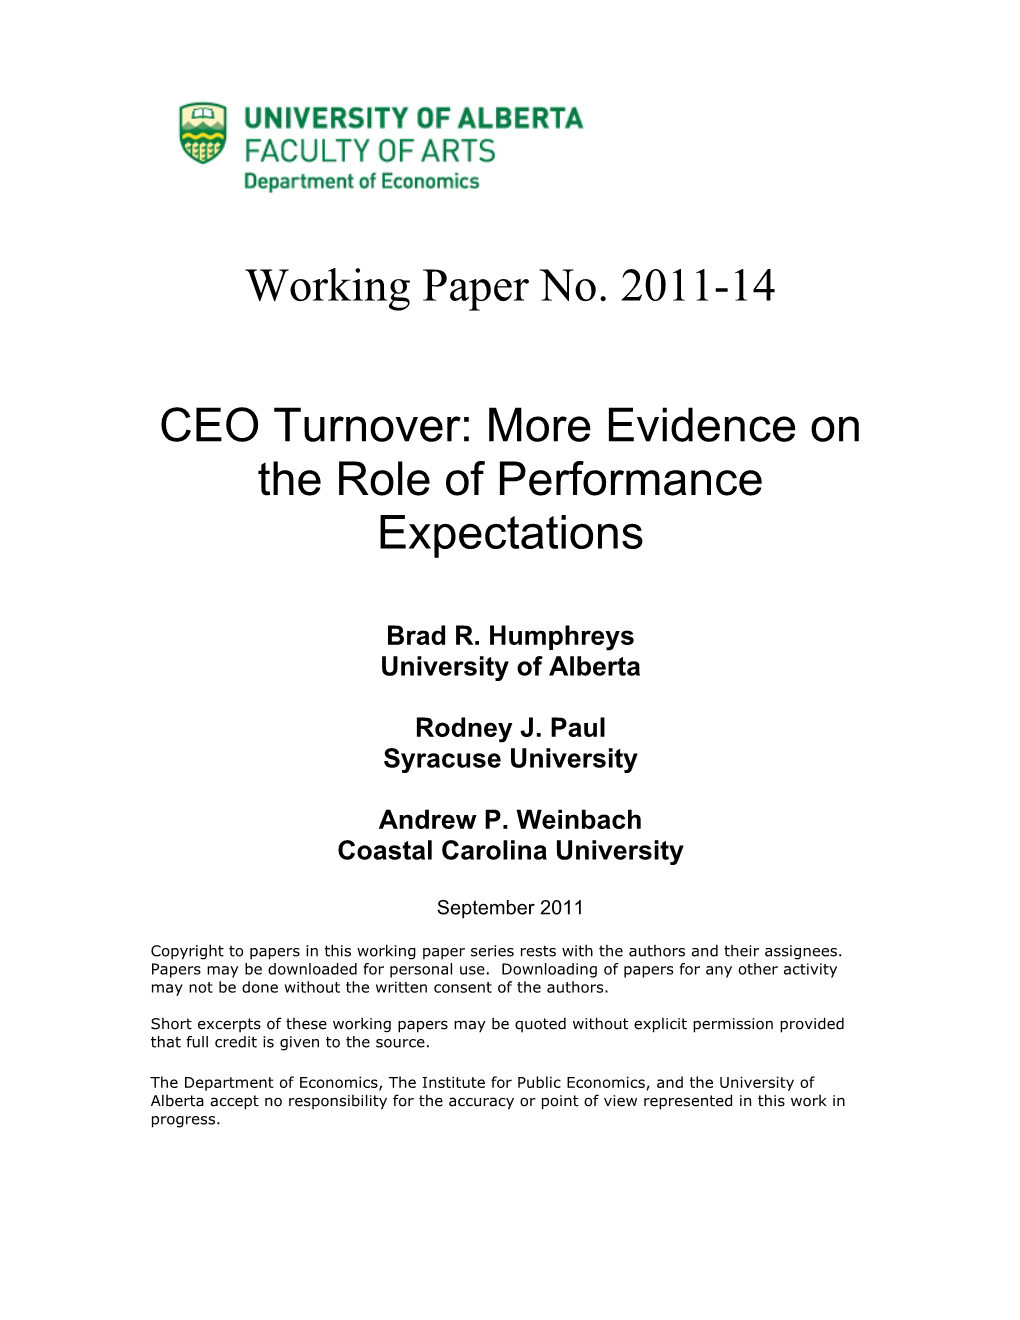 CEO Turnover: More Evidence on the Role of Performance Expectations